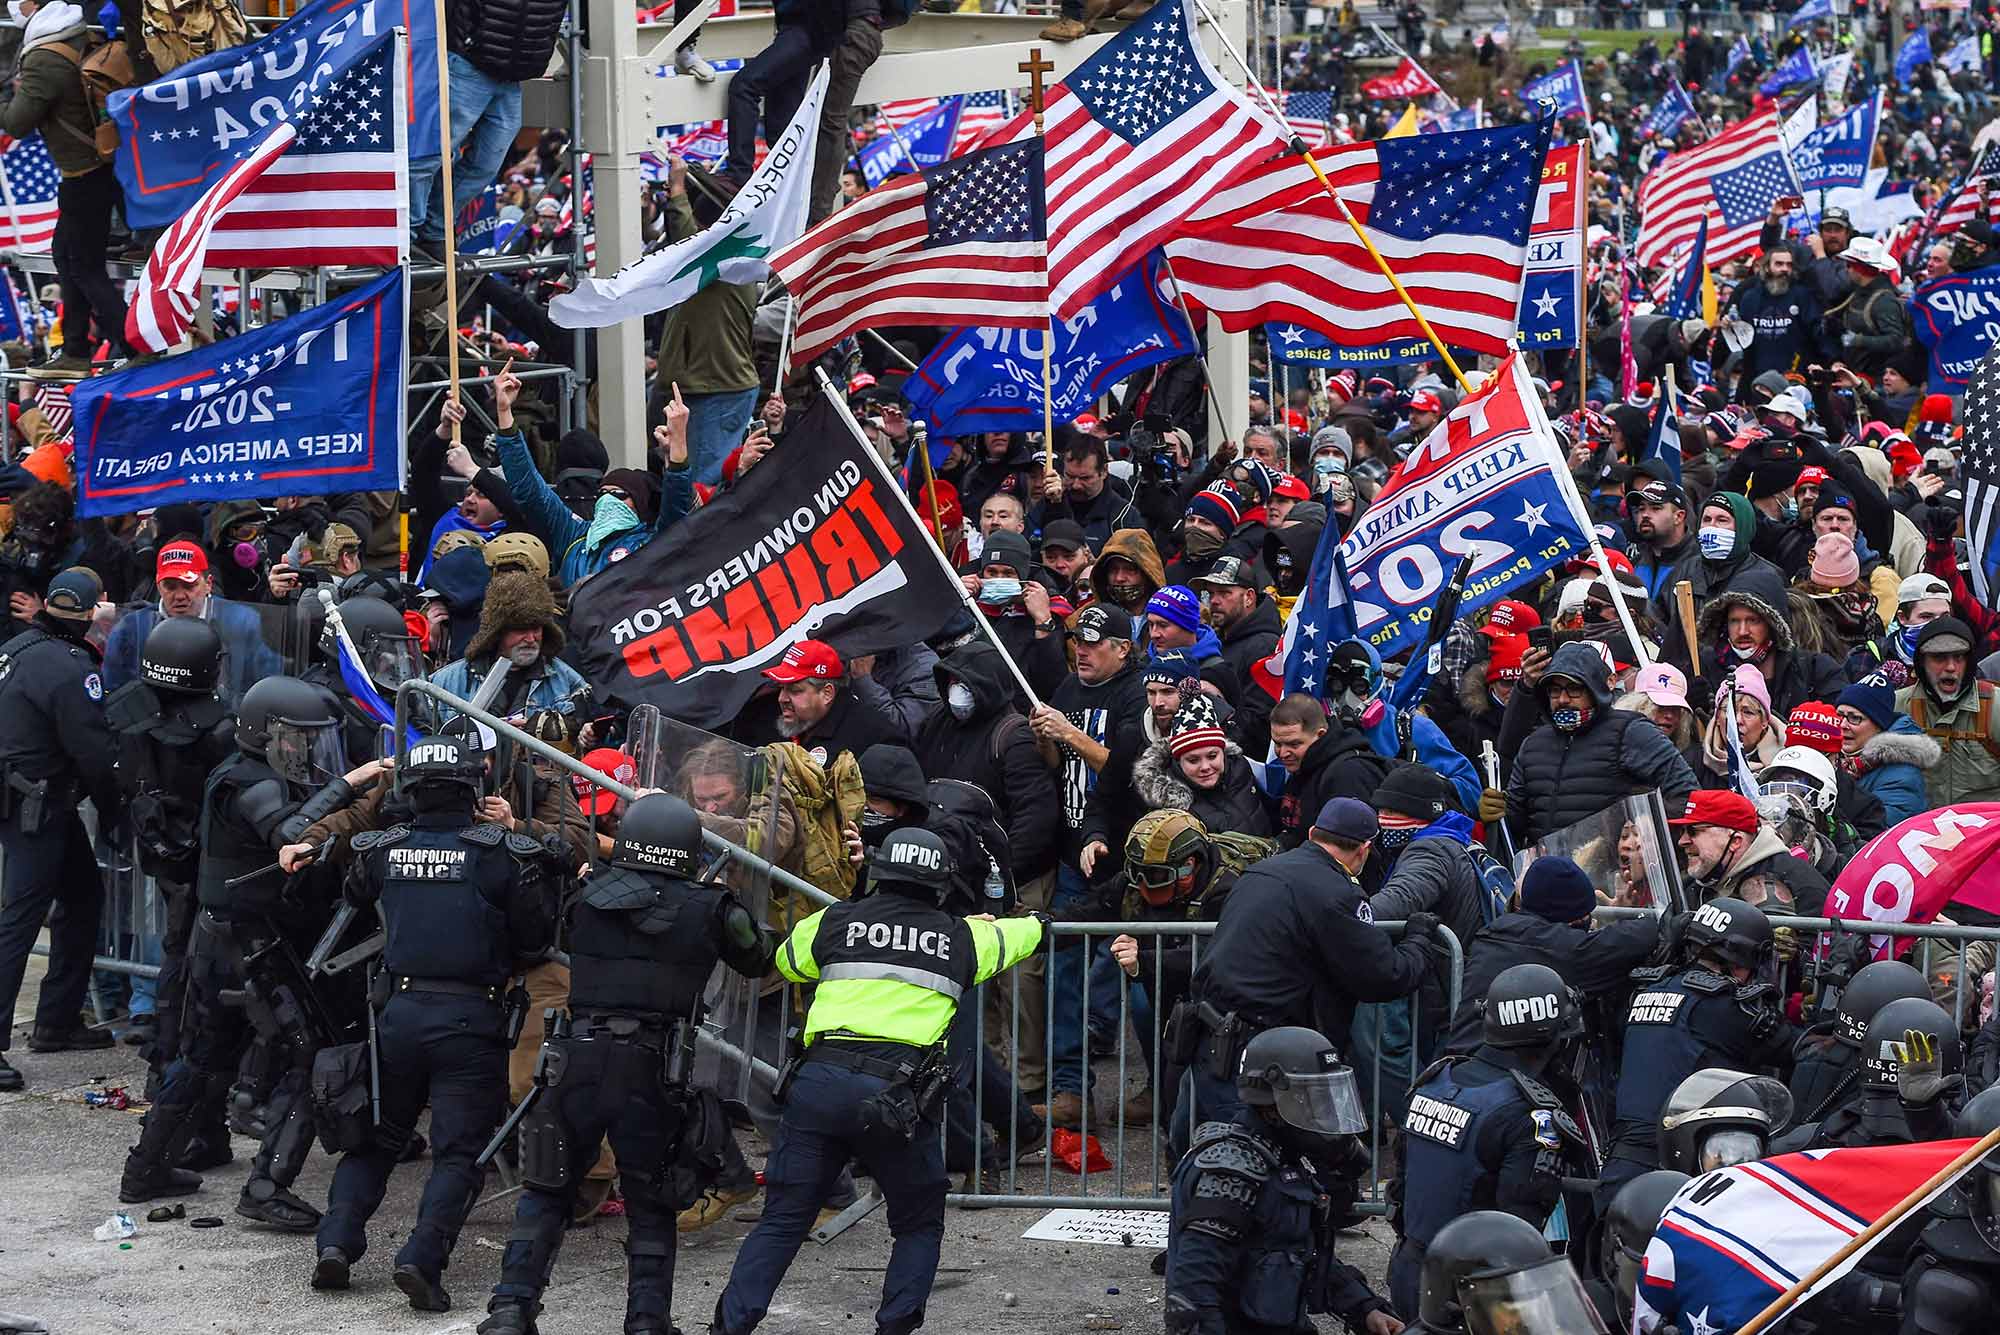 Photo of Trump supporters clashing with police and security forces as they storm the US Capitol in Washington, DC on January 6, 2021. Police officers, dressed in riot gear, push back a metal barrier as insurgent Trump supporters holding American flags and Trump 2020 flags try to break through the line.